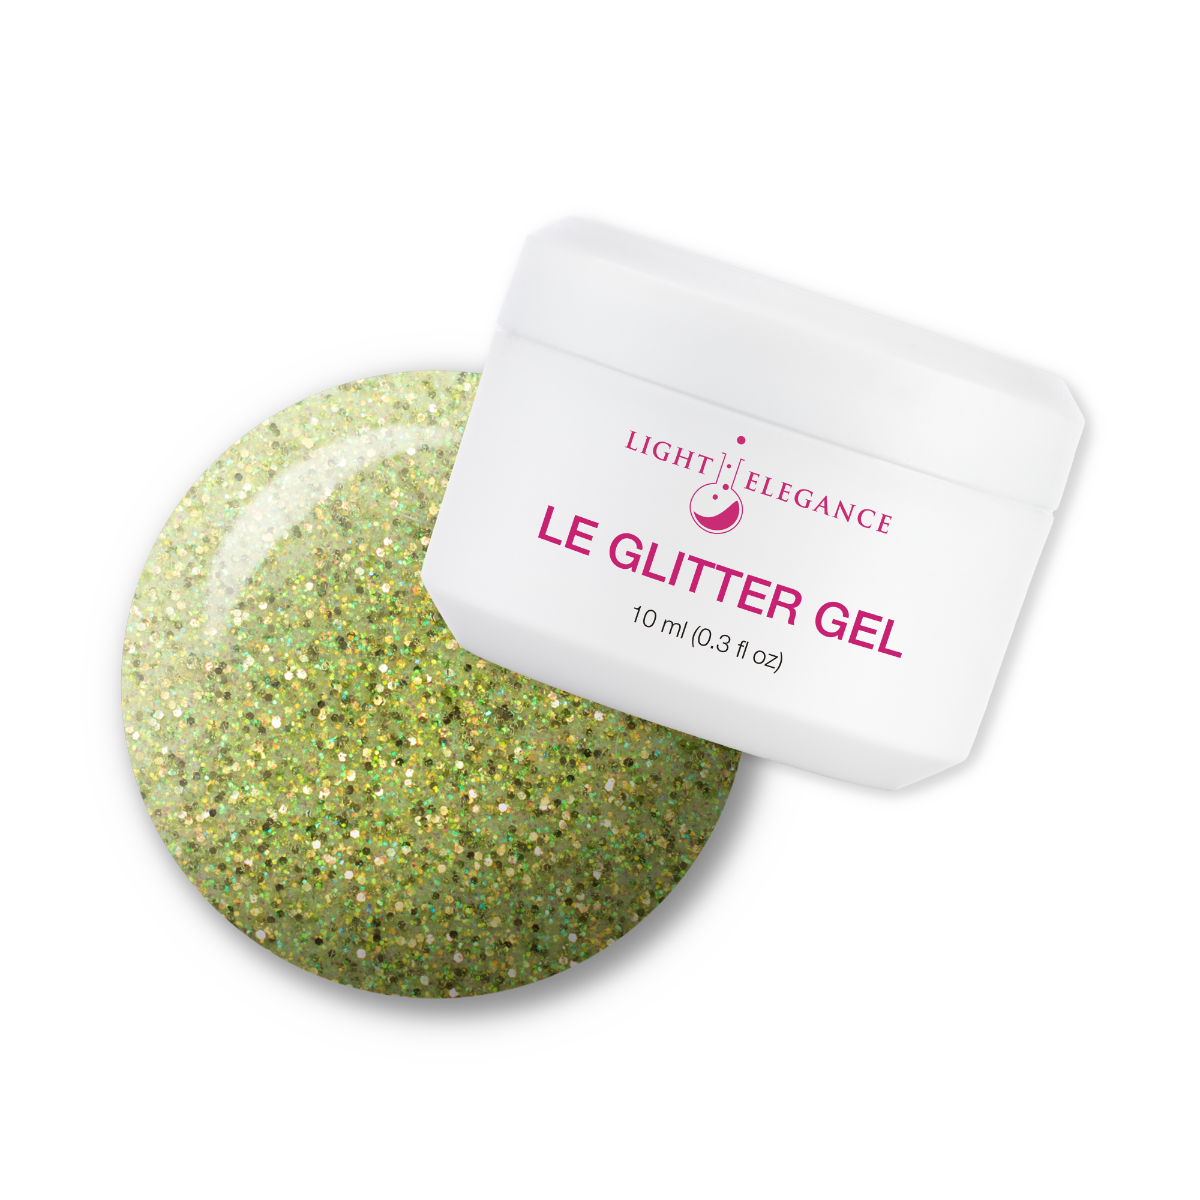 Light Elegance Glitter Gel - Peace and Love :: New Packaging - Creata Beauty - Professional Beauty Products